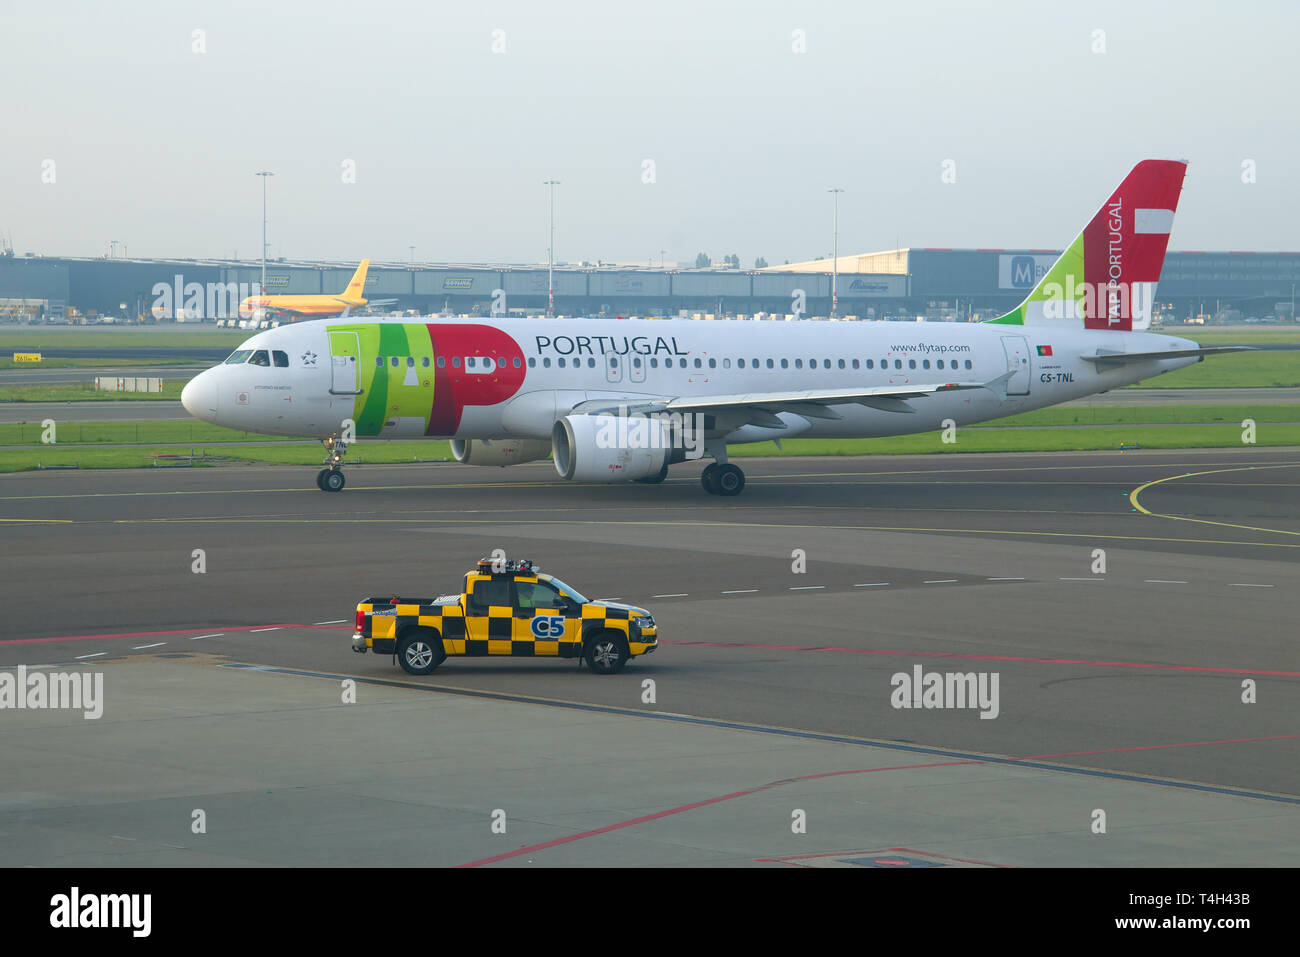 AMSTERDAM, NETHERLANDS - SEPTEMBER 17, 2017: The Airbus A320-214 (CS-TNL) of TAP - Air Portugal airline in the Schiphol Airport of early morning Stock Photo